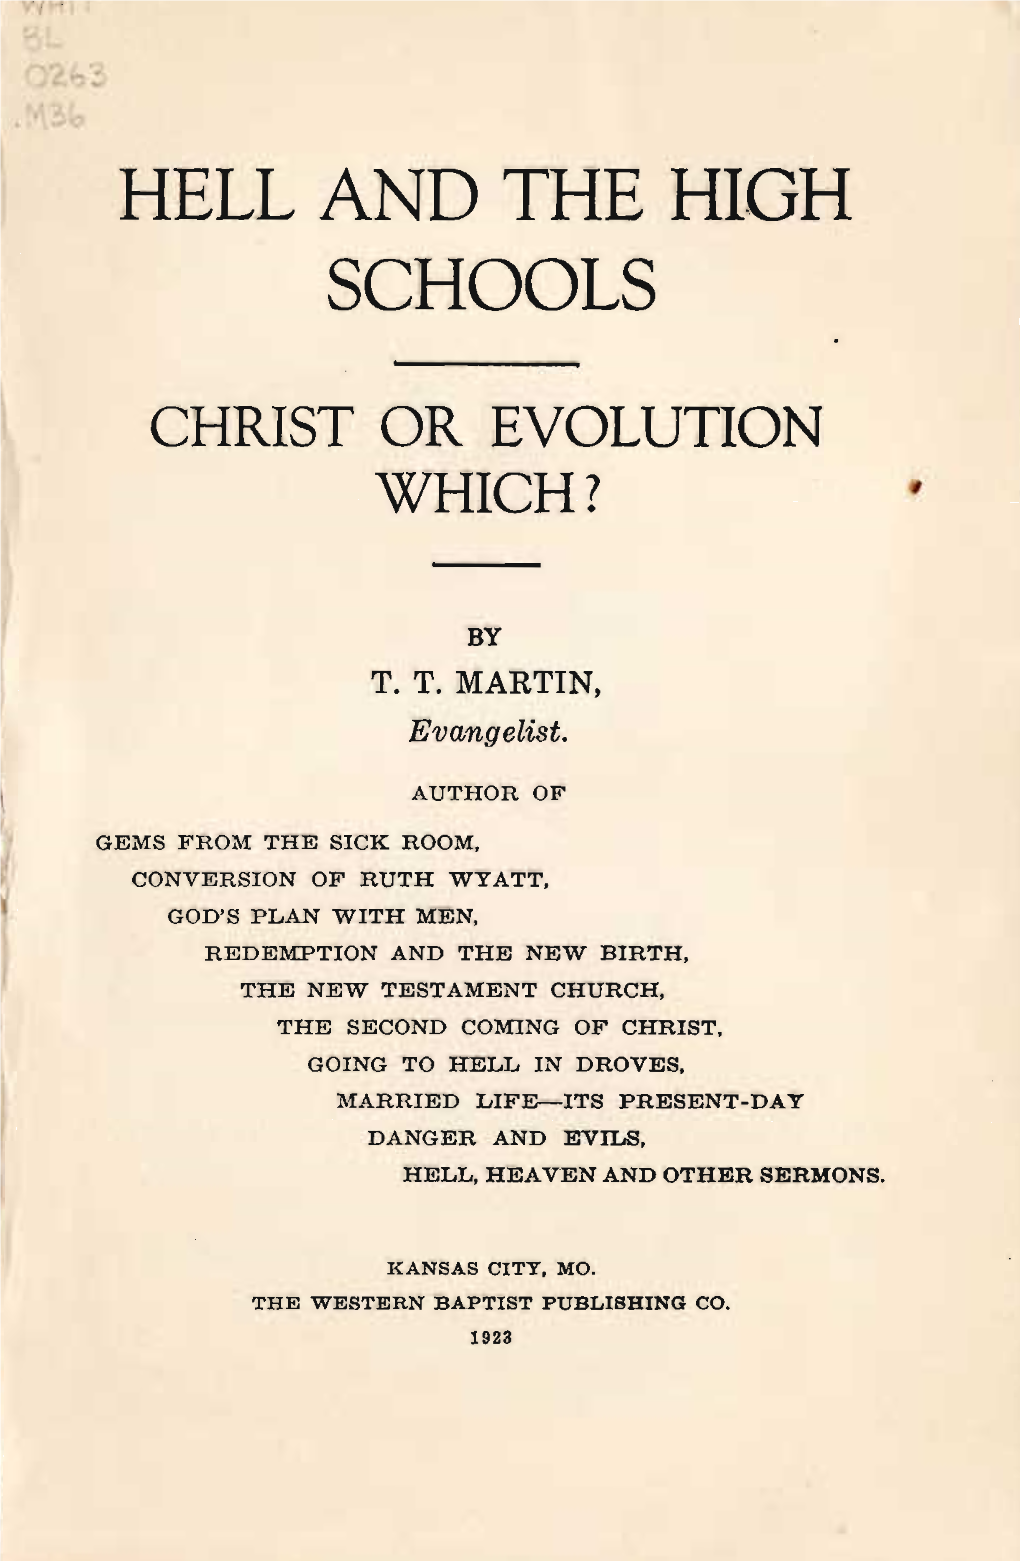 Hell and the High Schools by T.T. Martin